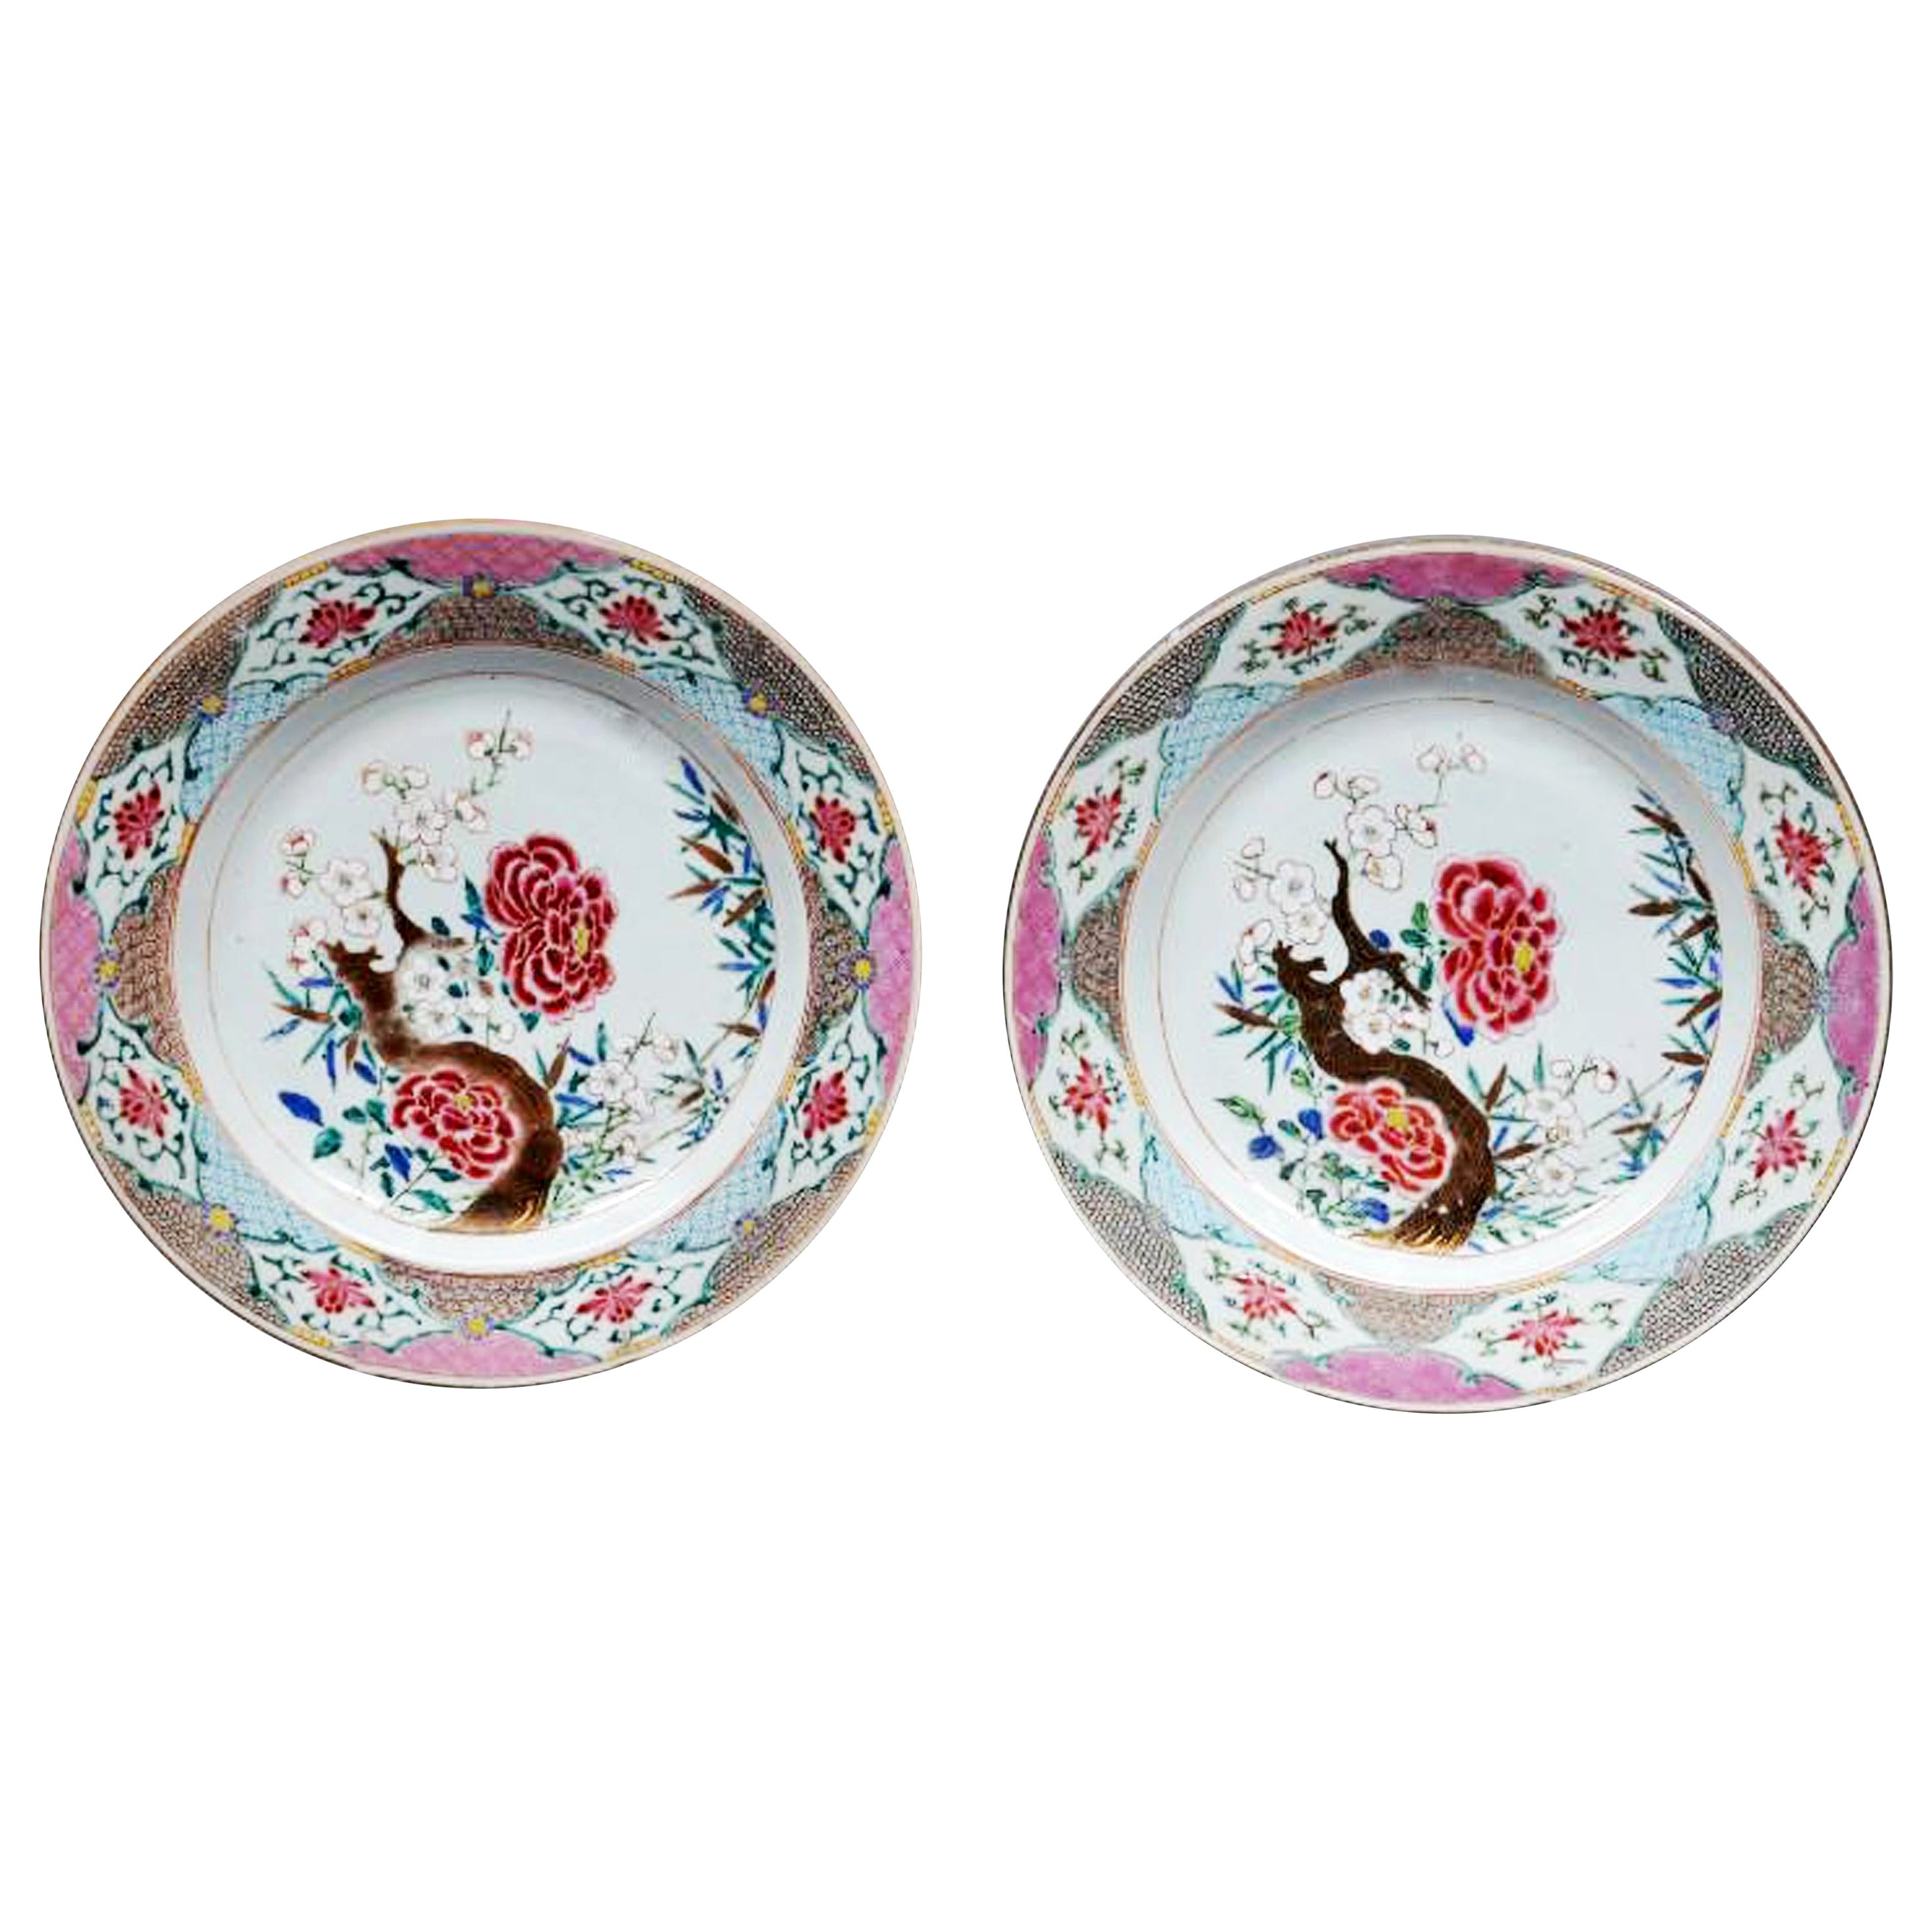 Chinese Export Famille Rose Porcelain Large Dishes, circa 1765-1775